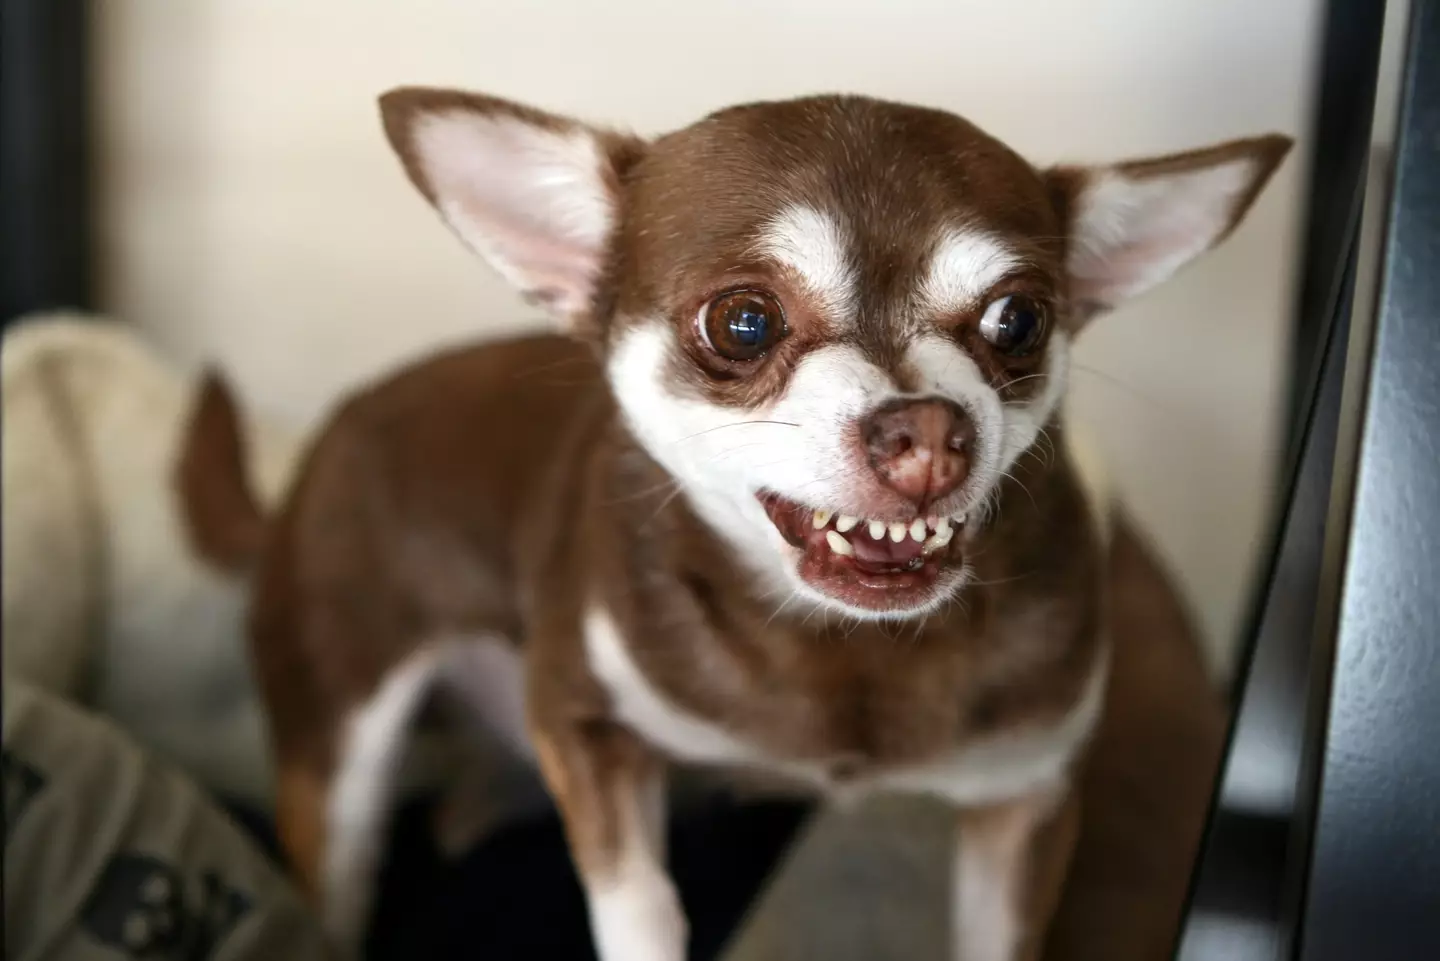 Garret described Chihuahua's as 'demons'.